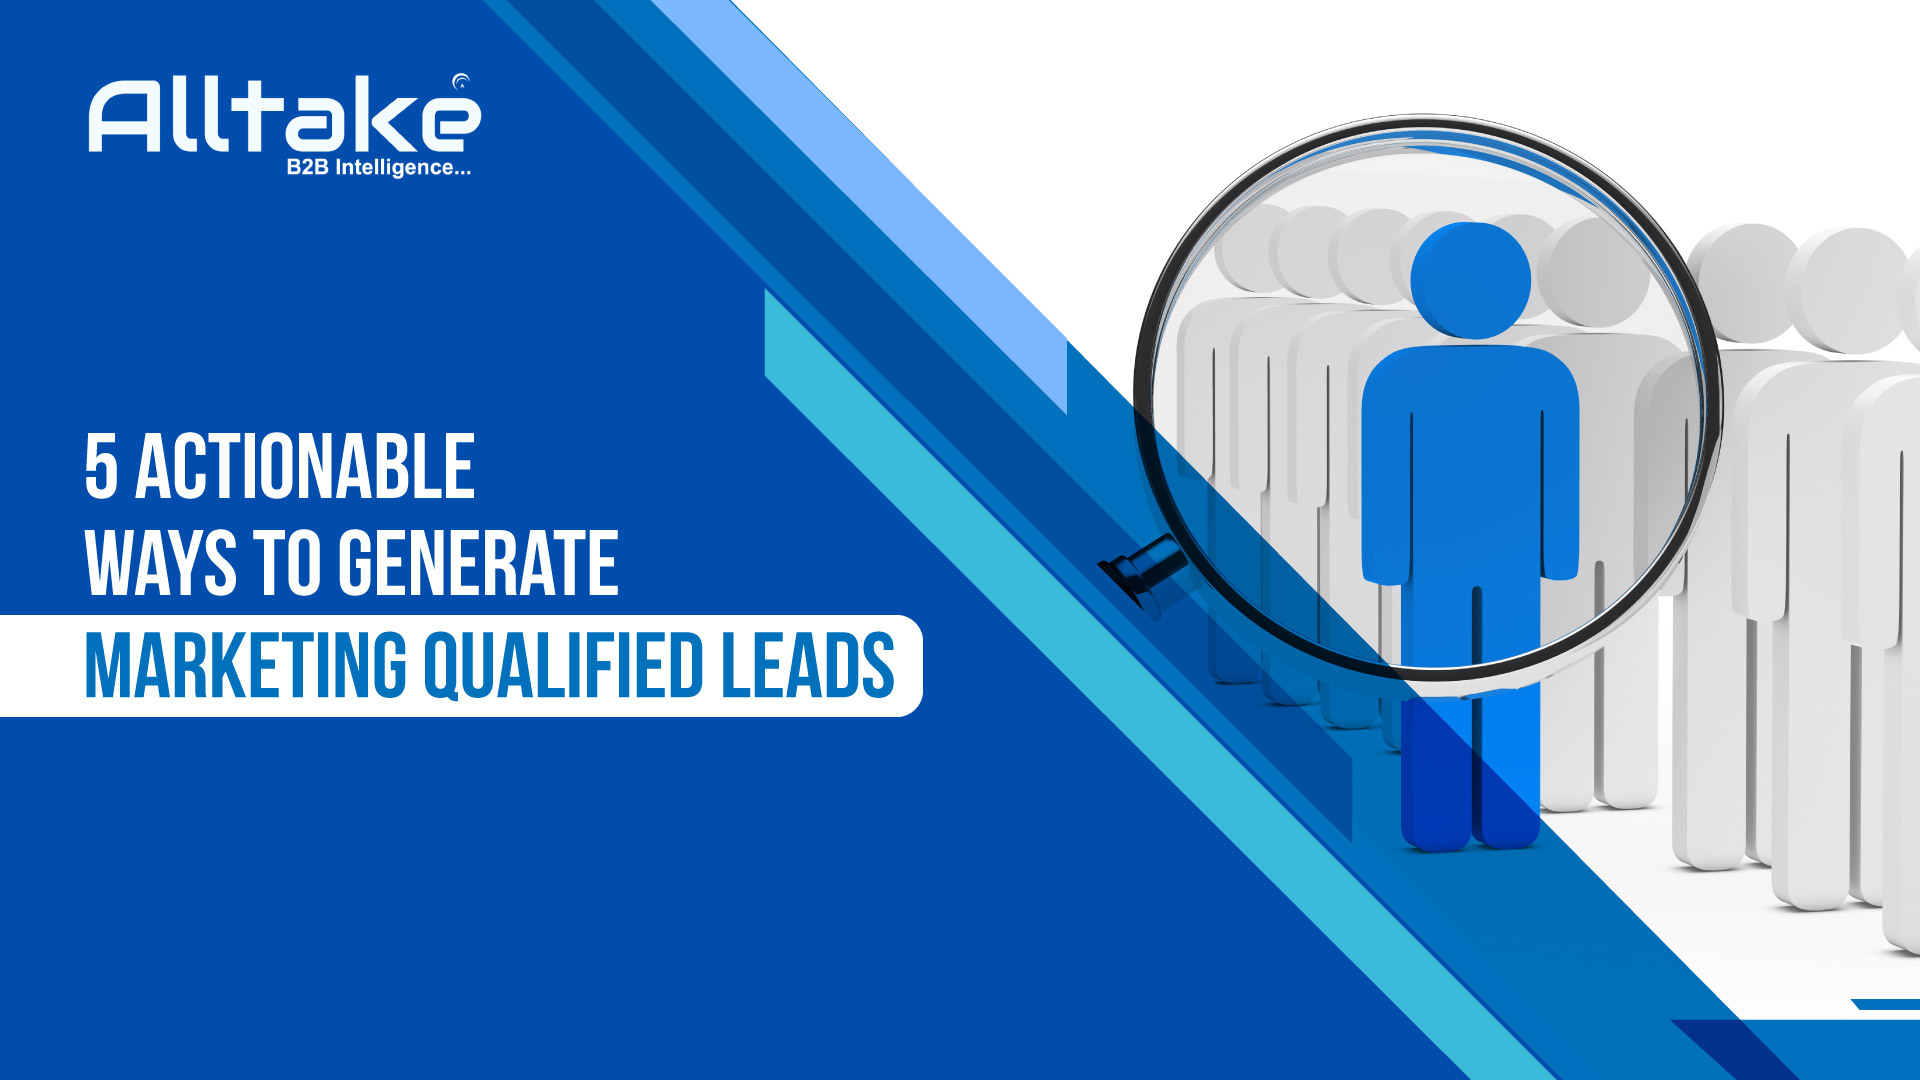 5 Actionable Ways to Generate Marketing Qualified Leads (MQLs)